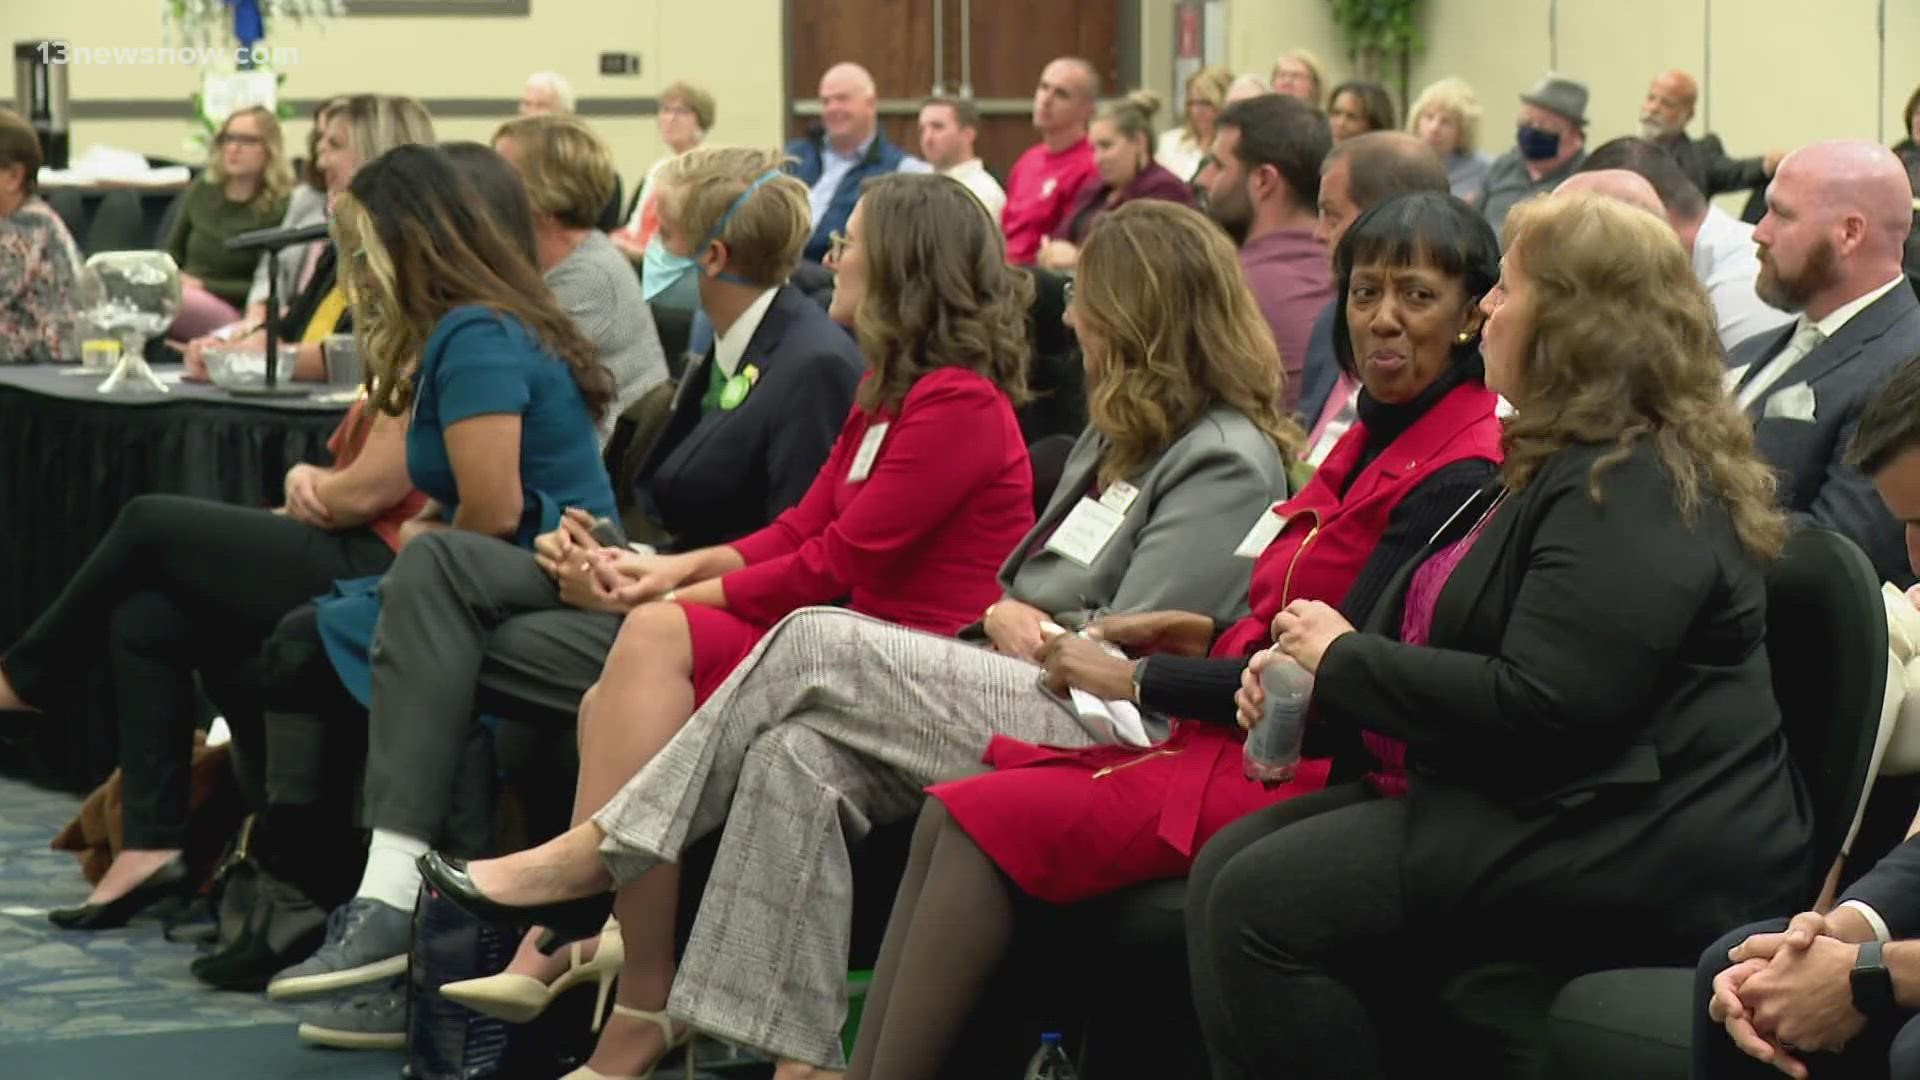 The candidates spoke at a forum and made their voices heard Wednesday evening.